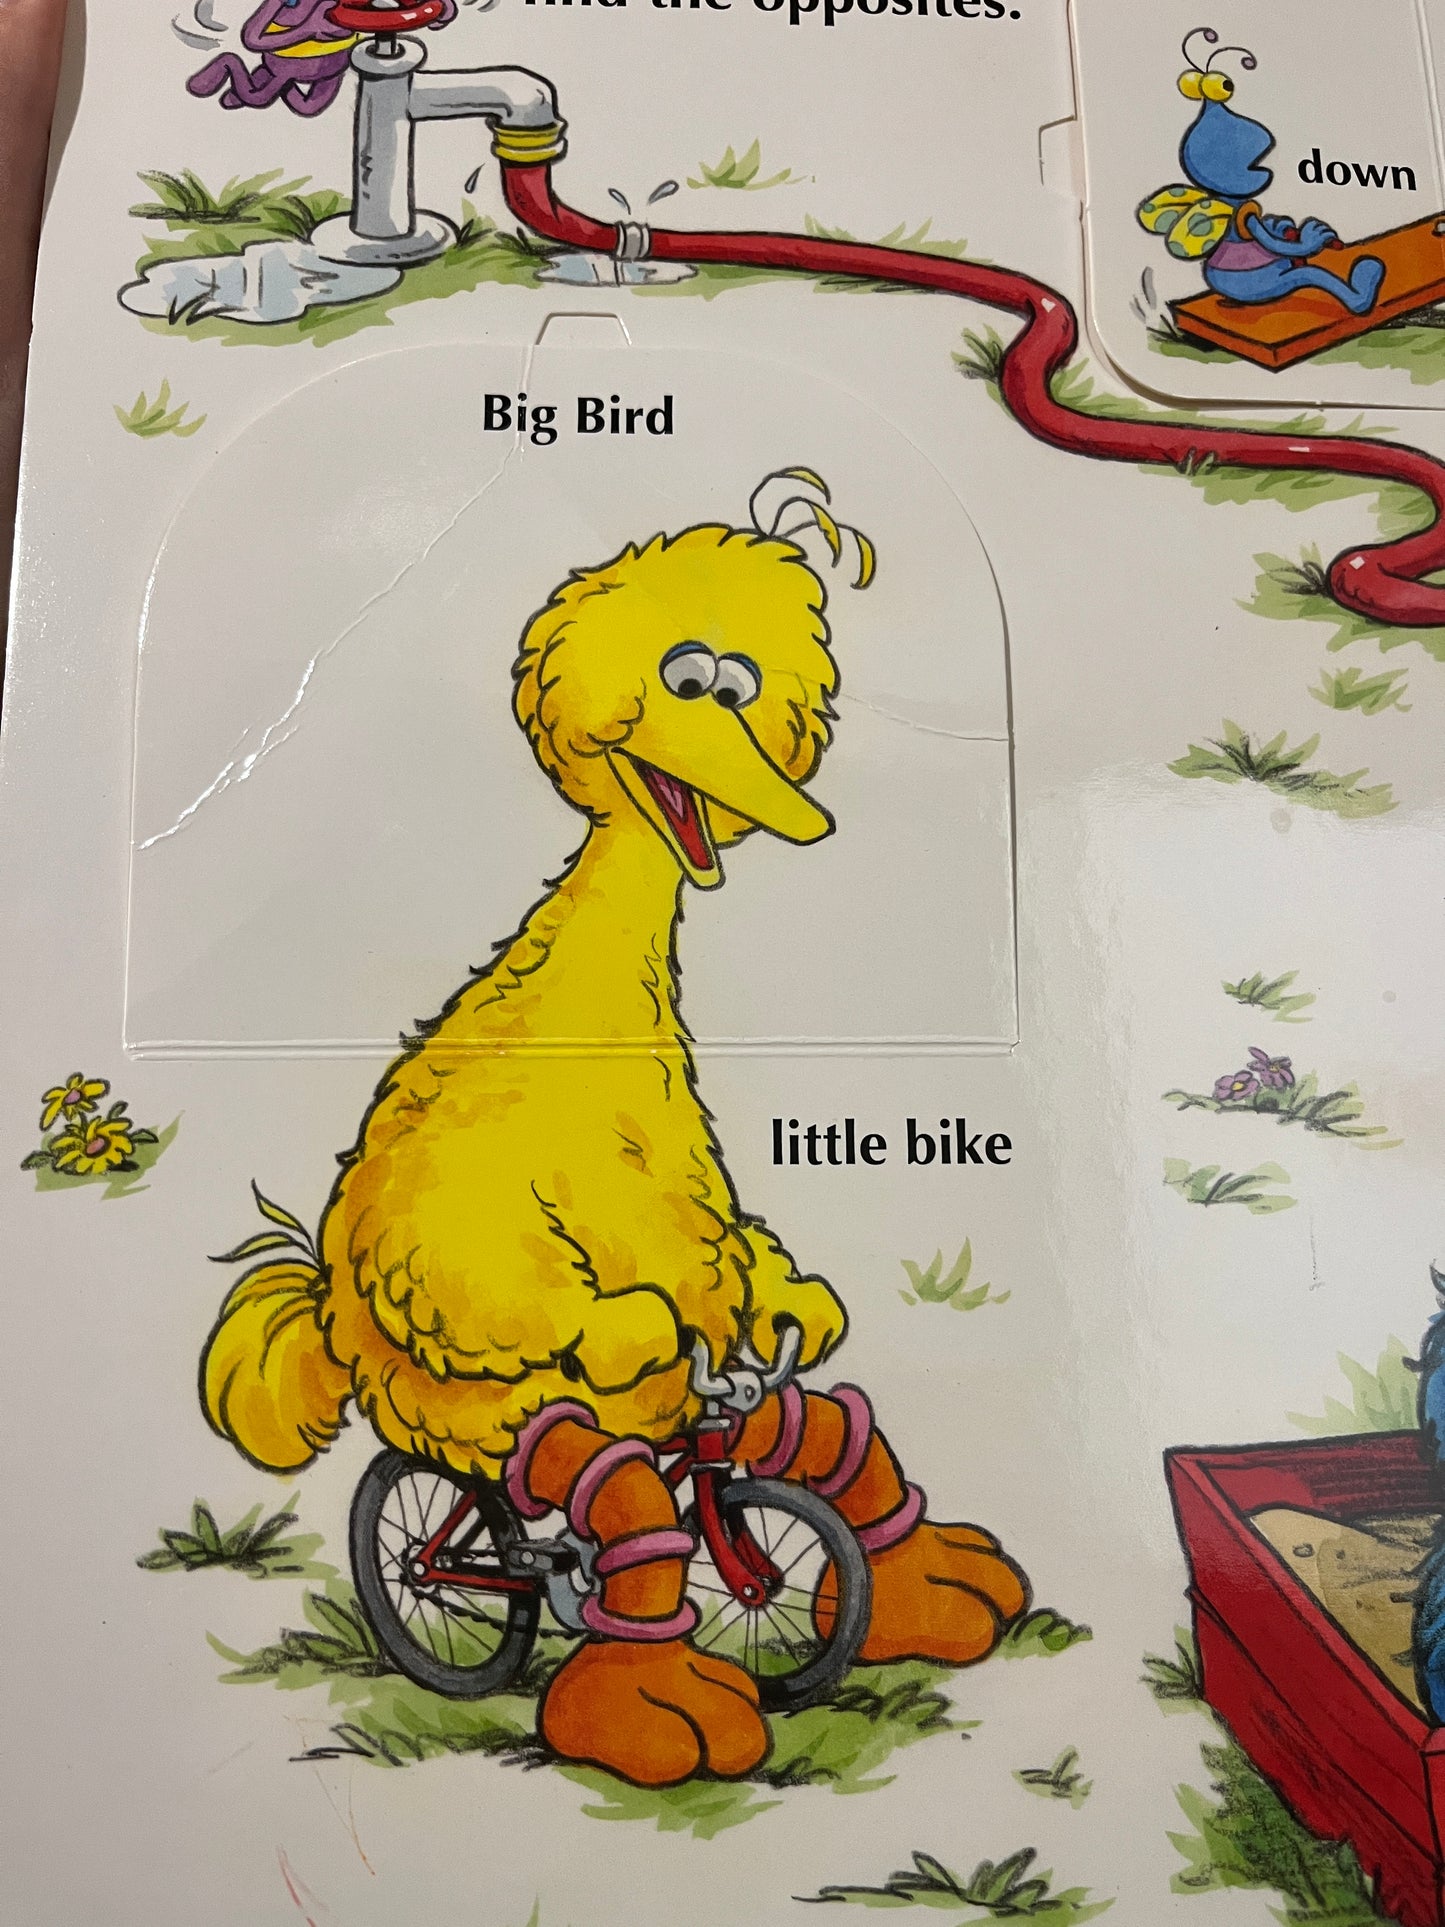 Elmo’s Big Lift-And-Look Book (Ross)